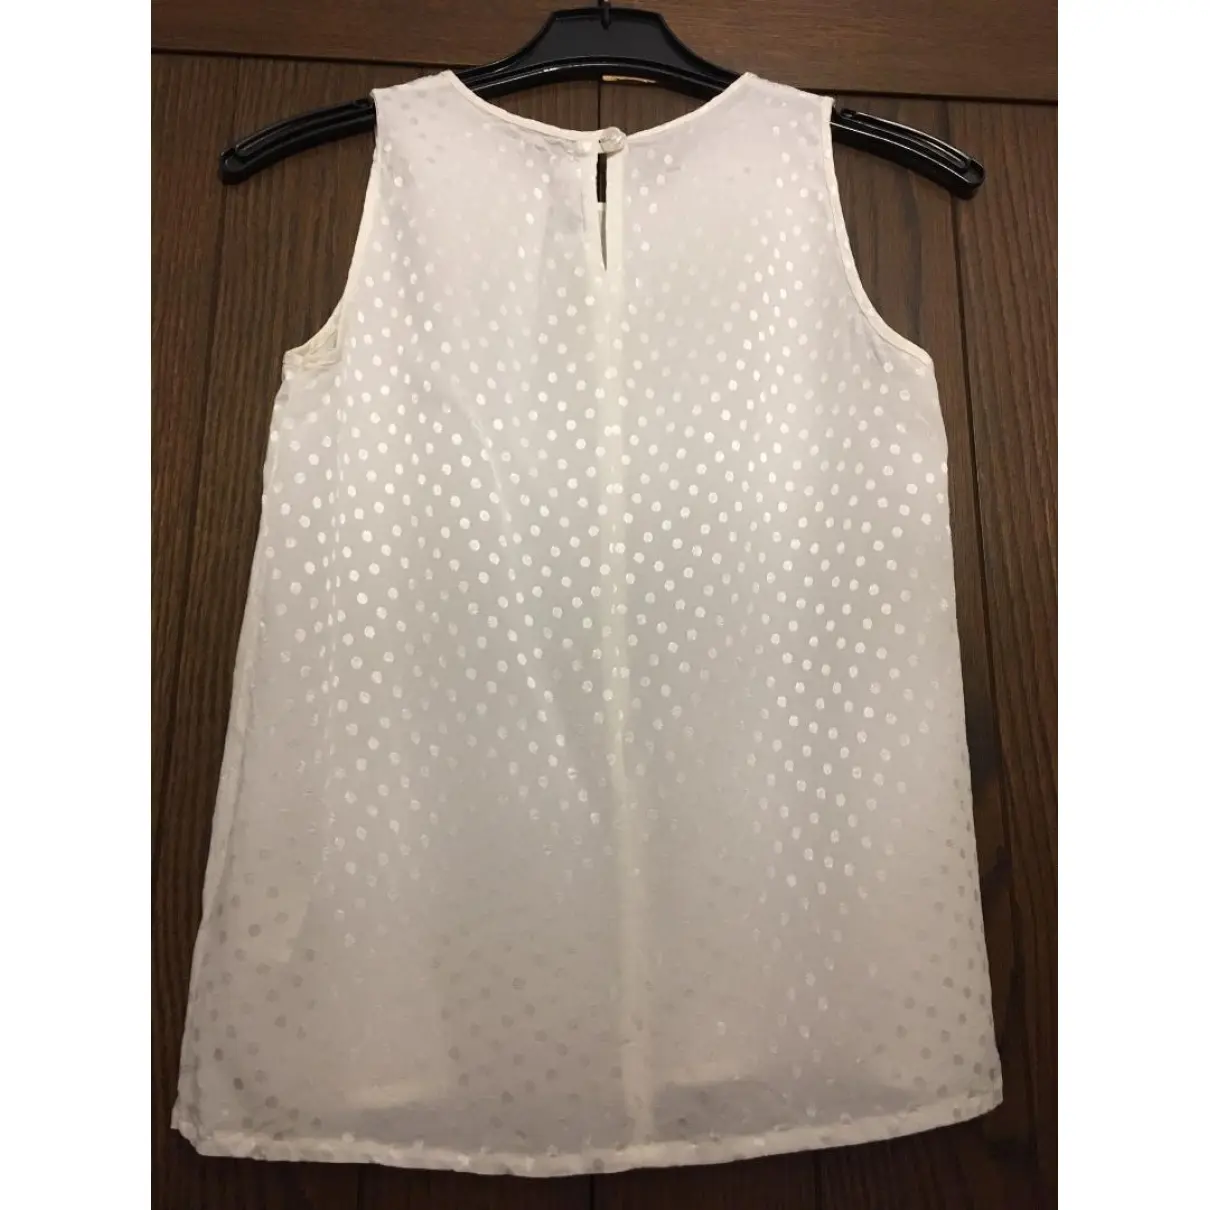 Karl Lagerfeld White Synthetic Top for sale - Vintage